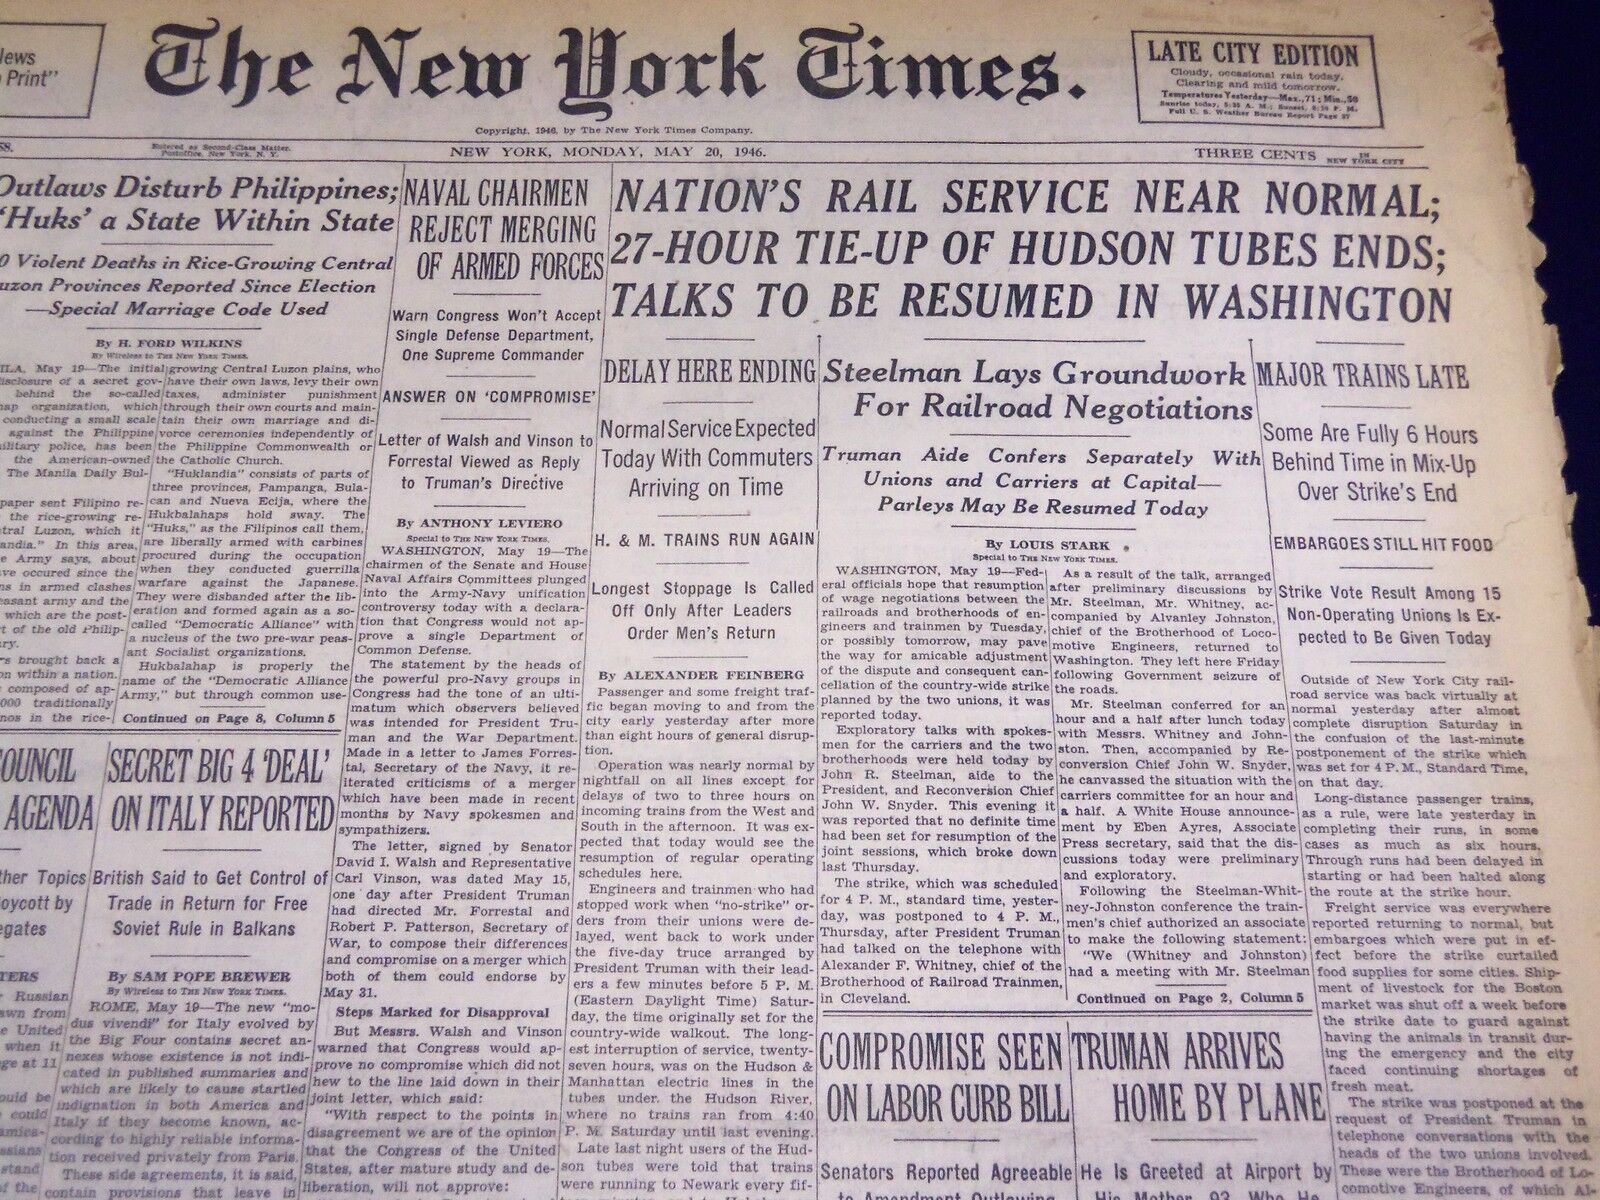 1946 MAY 20 NEW YORK TIMES - NATION'S RAIL SERVICE NEAR NORMAL - NT 2296